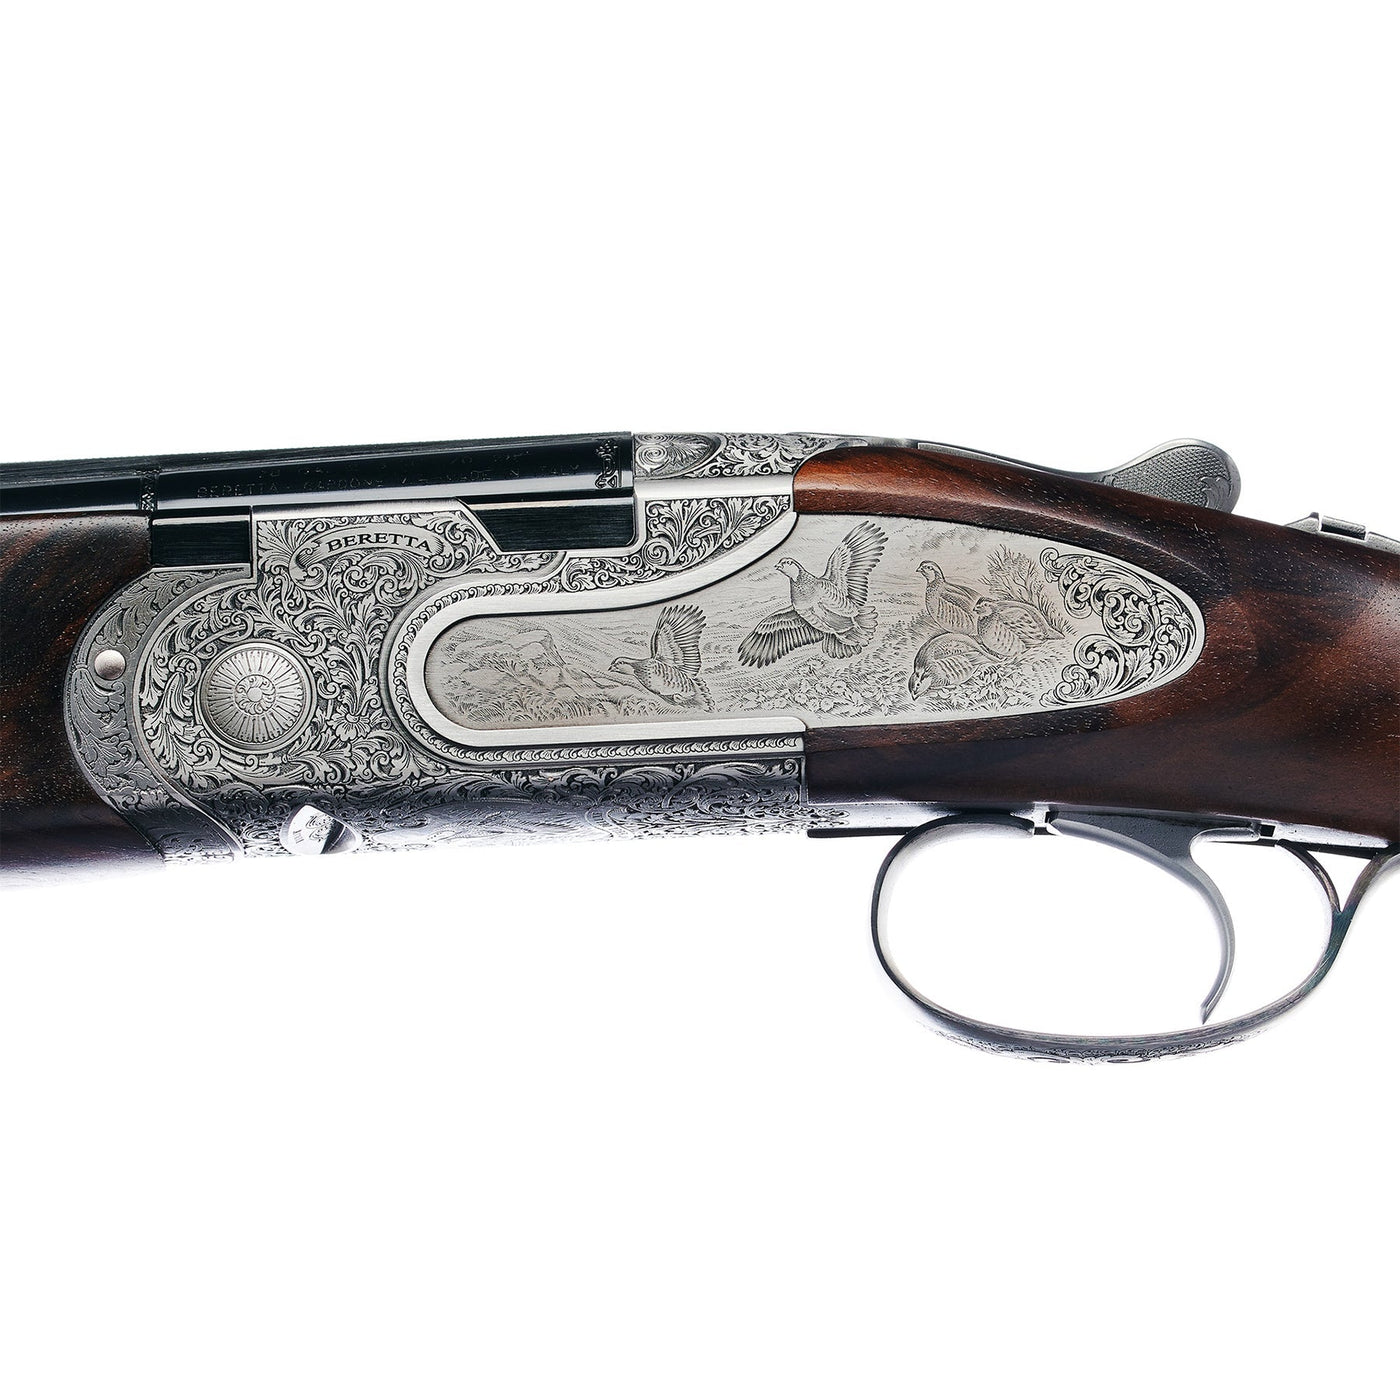 Beretta 687 EELL Classic over and under shotgun for sale